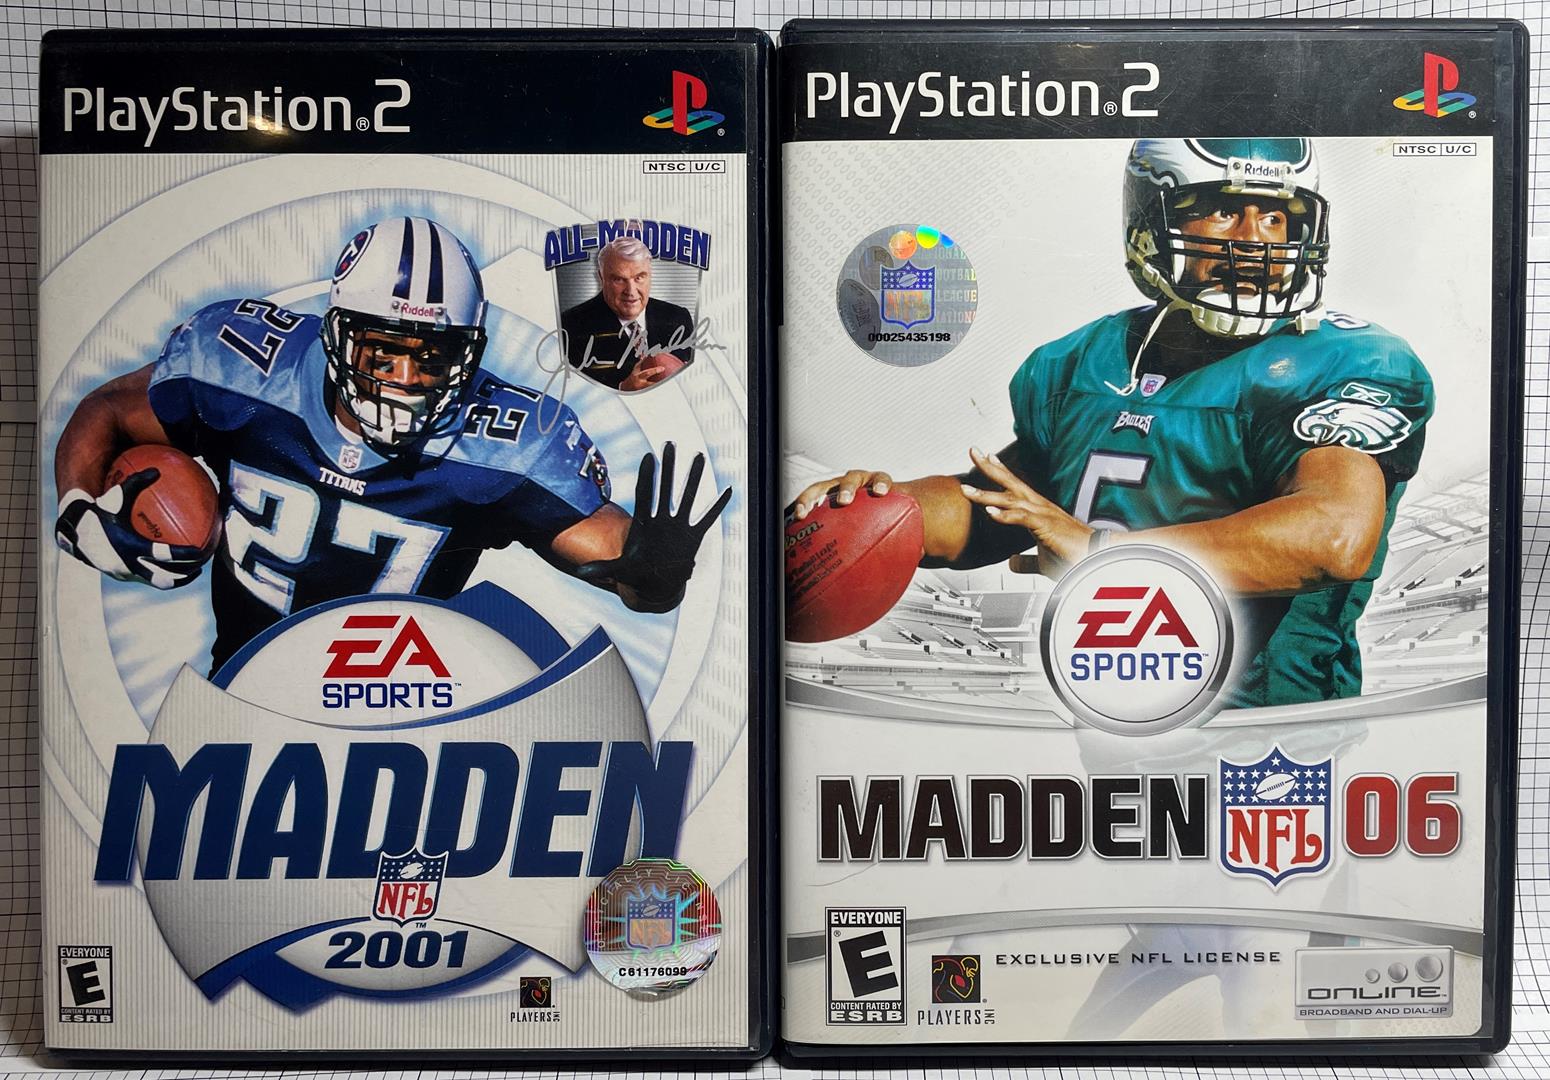 2002 madden cover